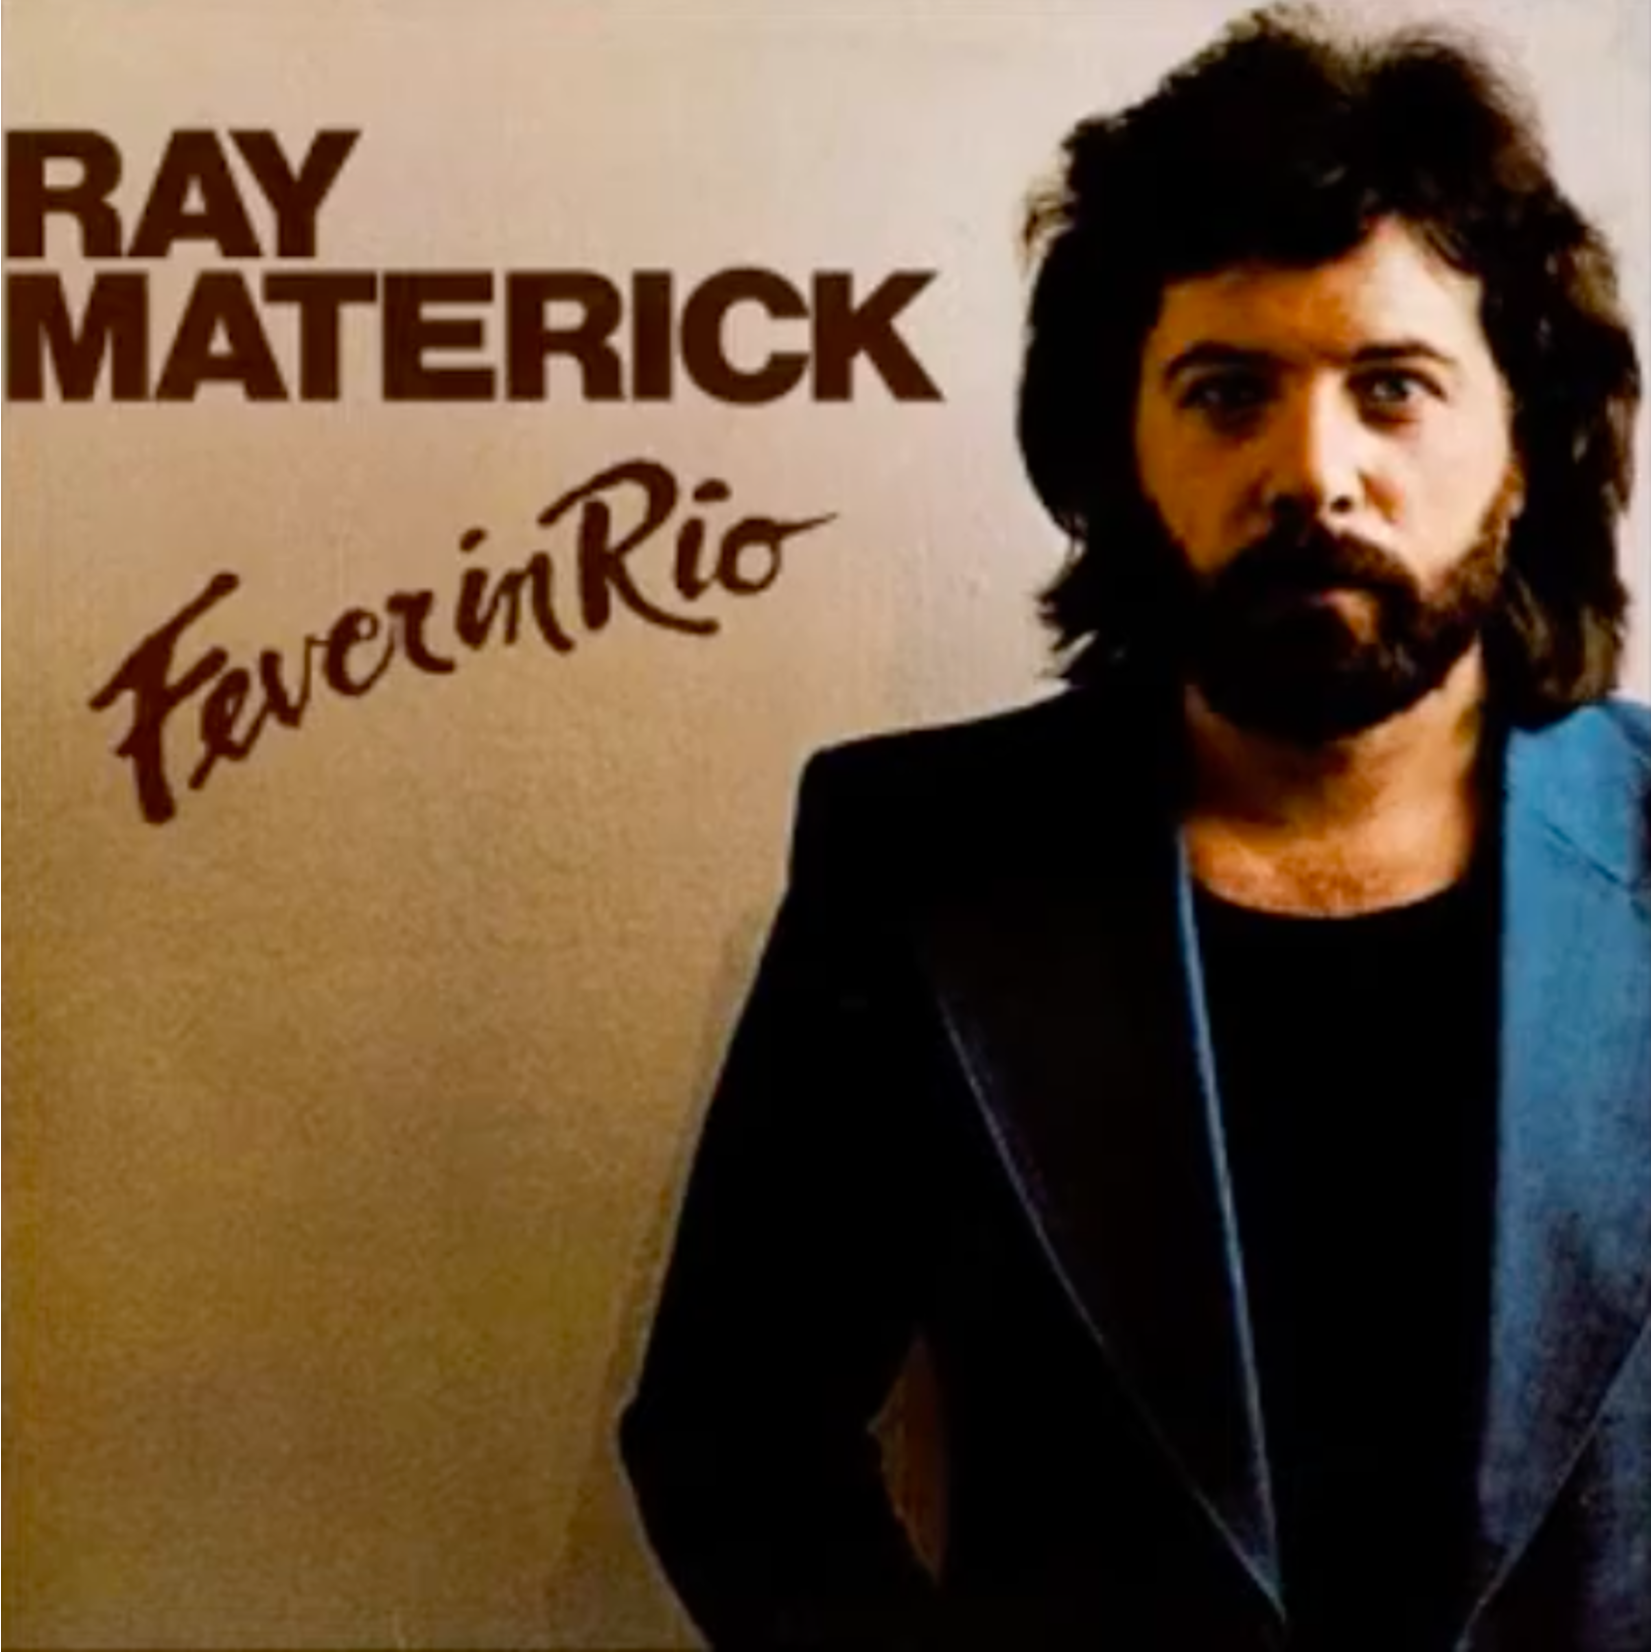 [Discontinued] Ray Materick - Fever in Rio